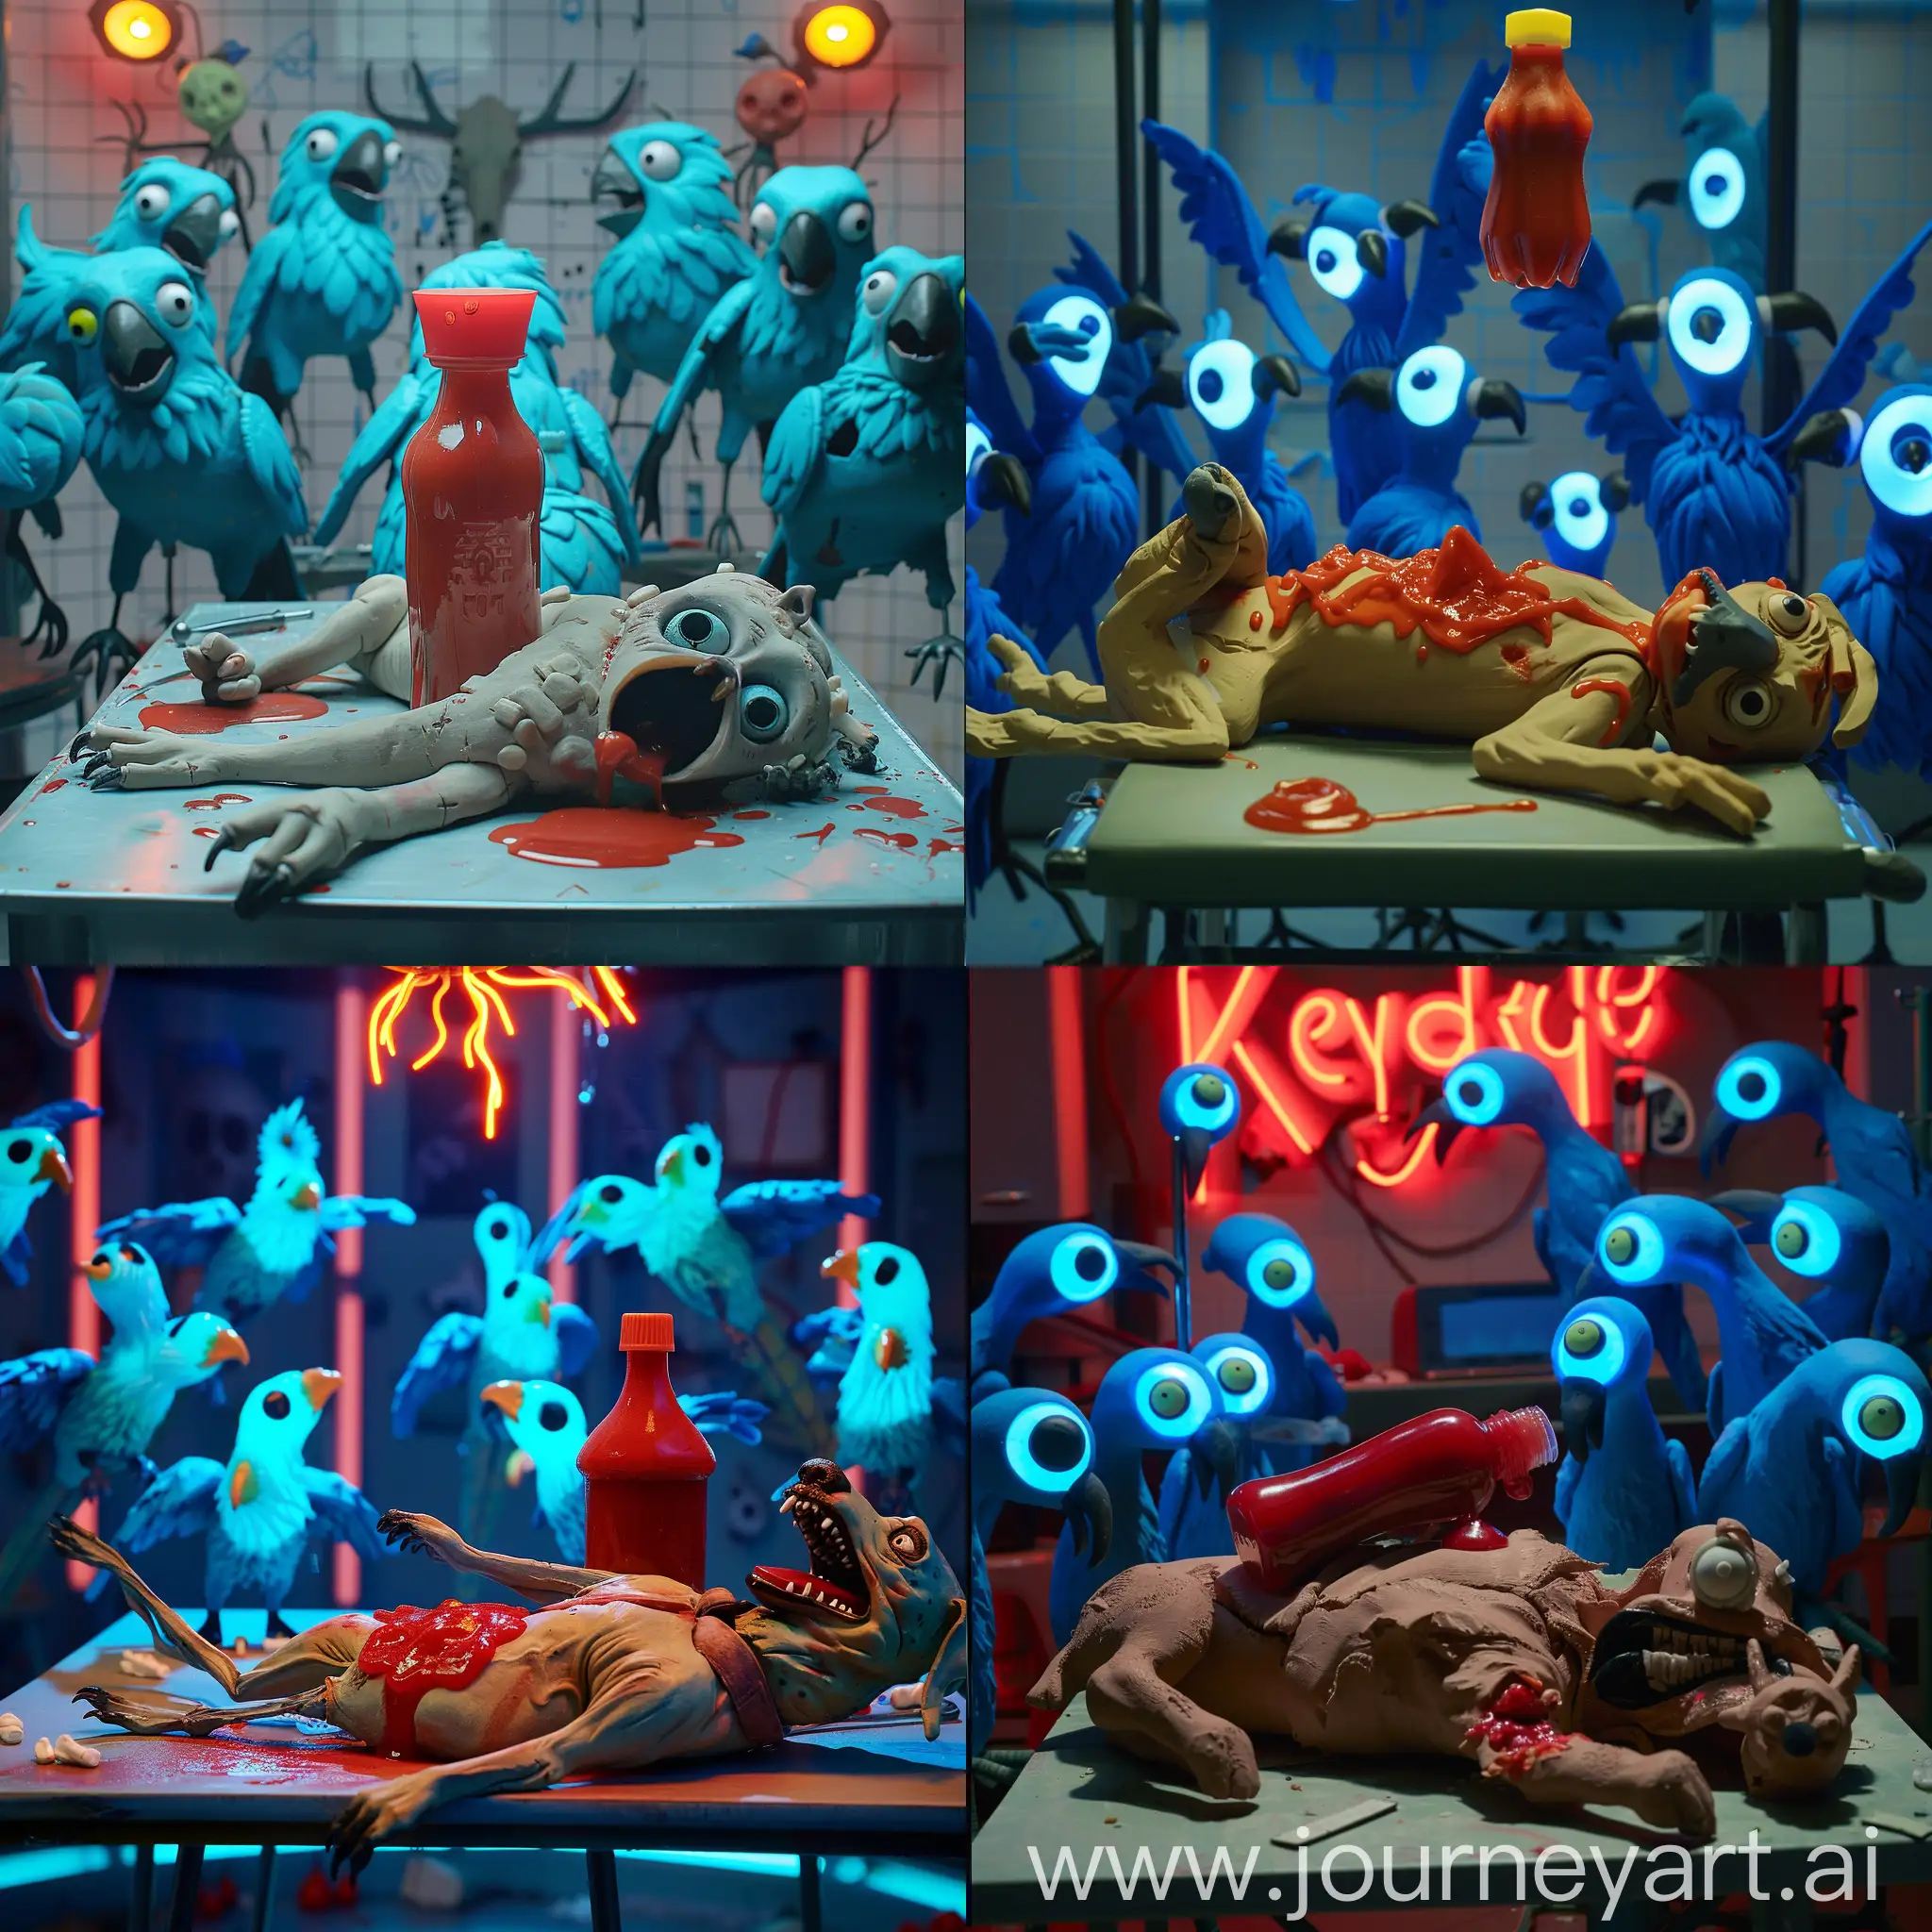 Claymation-Scene-Ketchup-Bottle-on-Dogs-Body-in-Autopsy-Room-with-Neon-Blue-Parrots